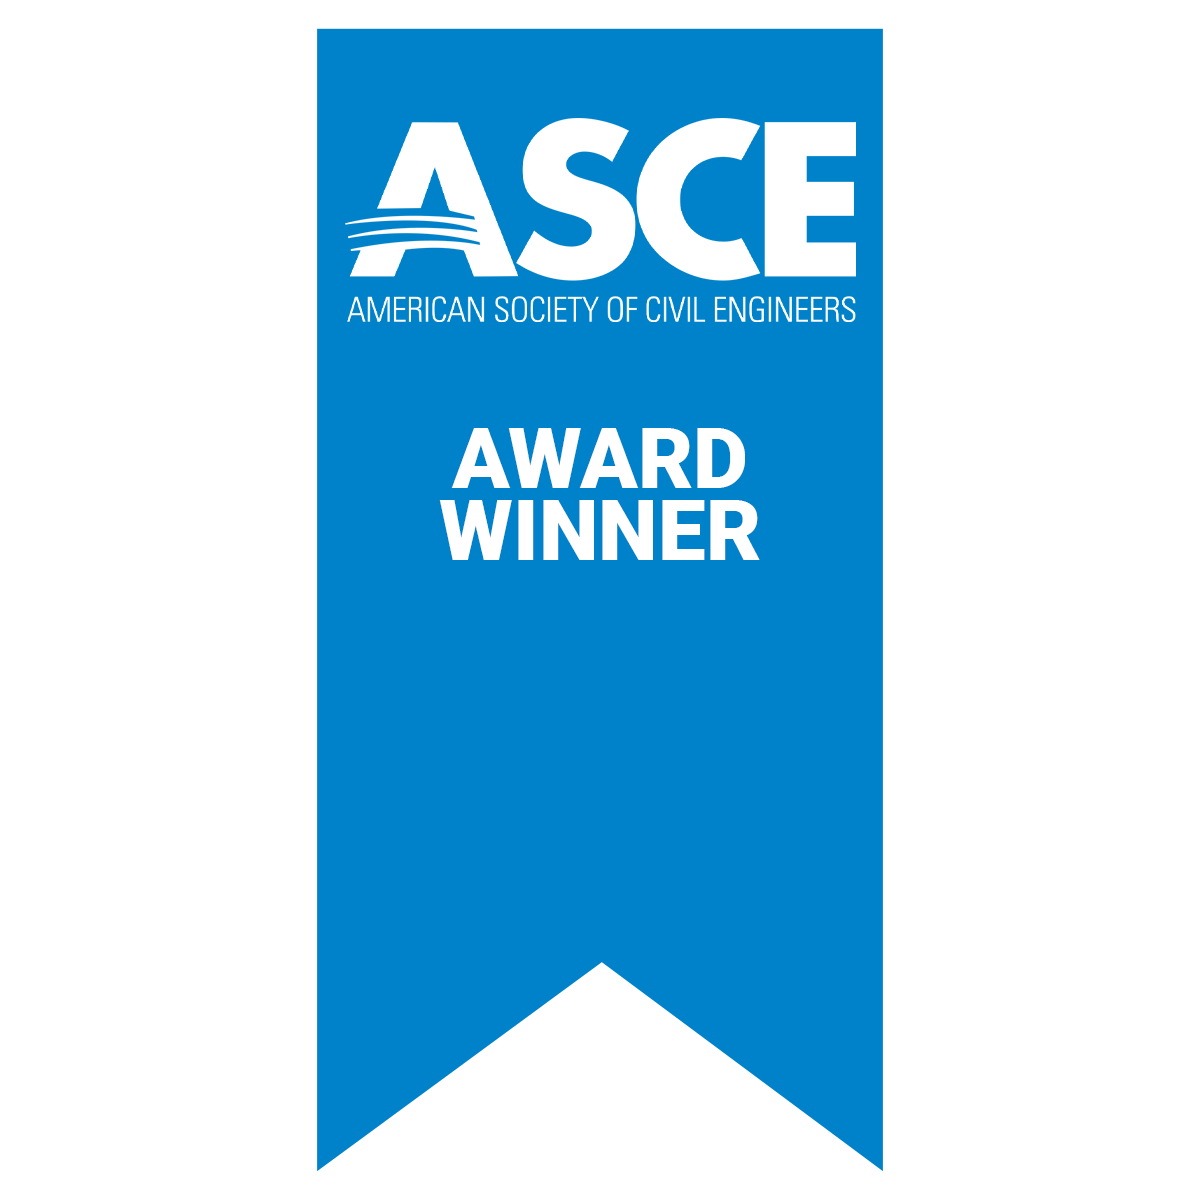 2017 Outstanding Civil Engineering Achievement Award from the American Society of Civil Engineers (ASCE) Syracuse Section.